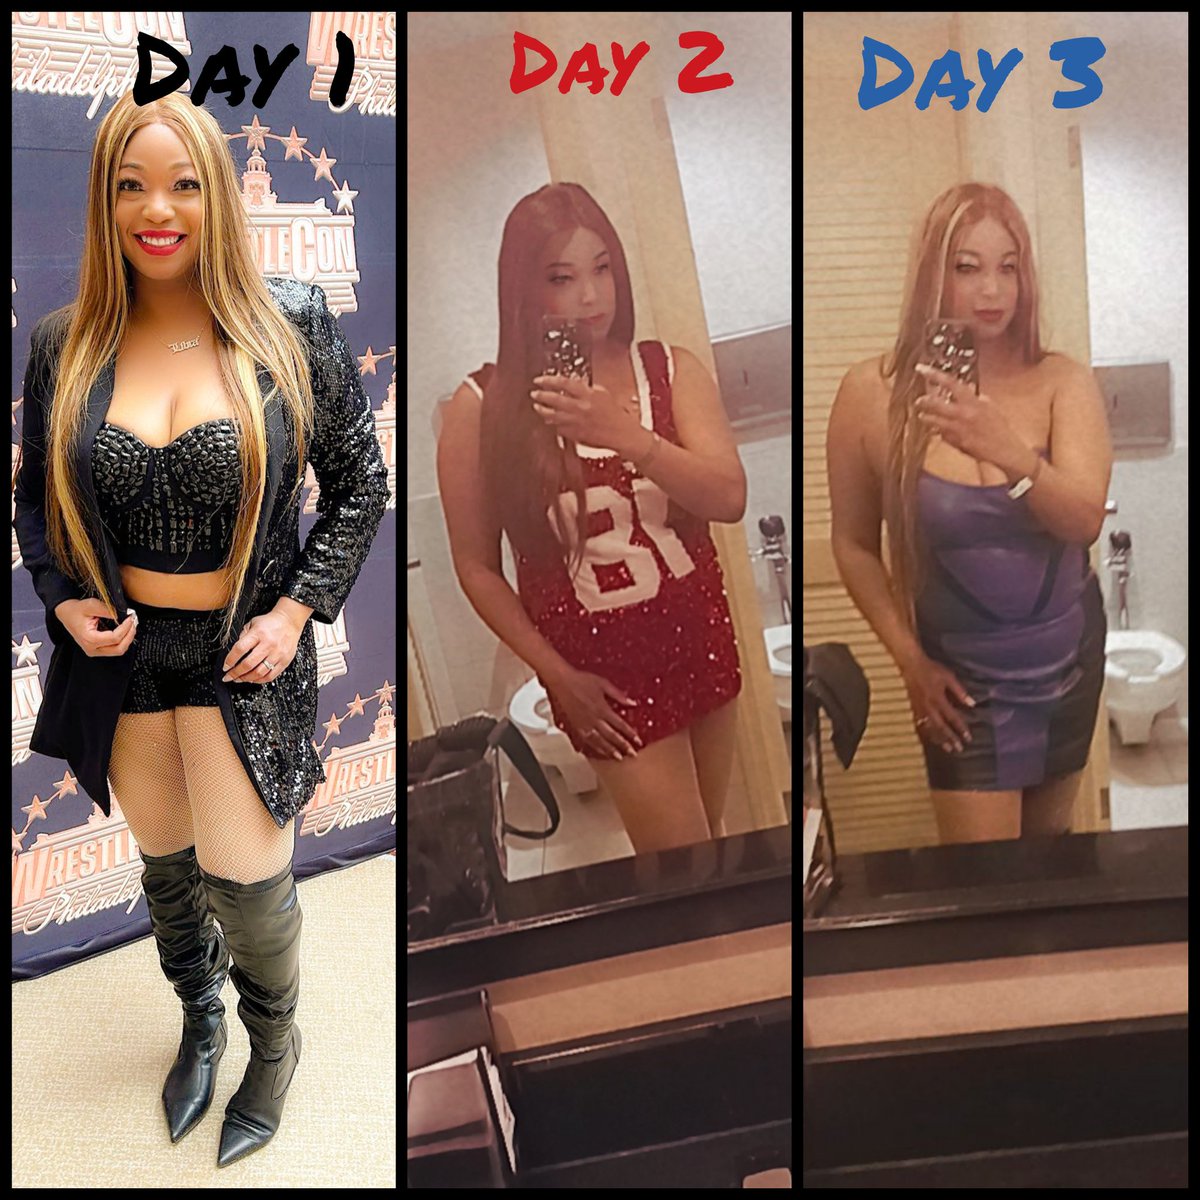 @wrestlecon was so much fun...All My Wrestlecon outfits.  Had so much fun talking to talent and mingling with friends #aew #wwe #impactwrestling #Wrestlecon #WrestleMania40 #ladieswholovewrestling #sheratonphiladelphia